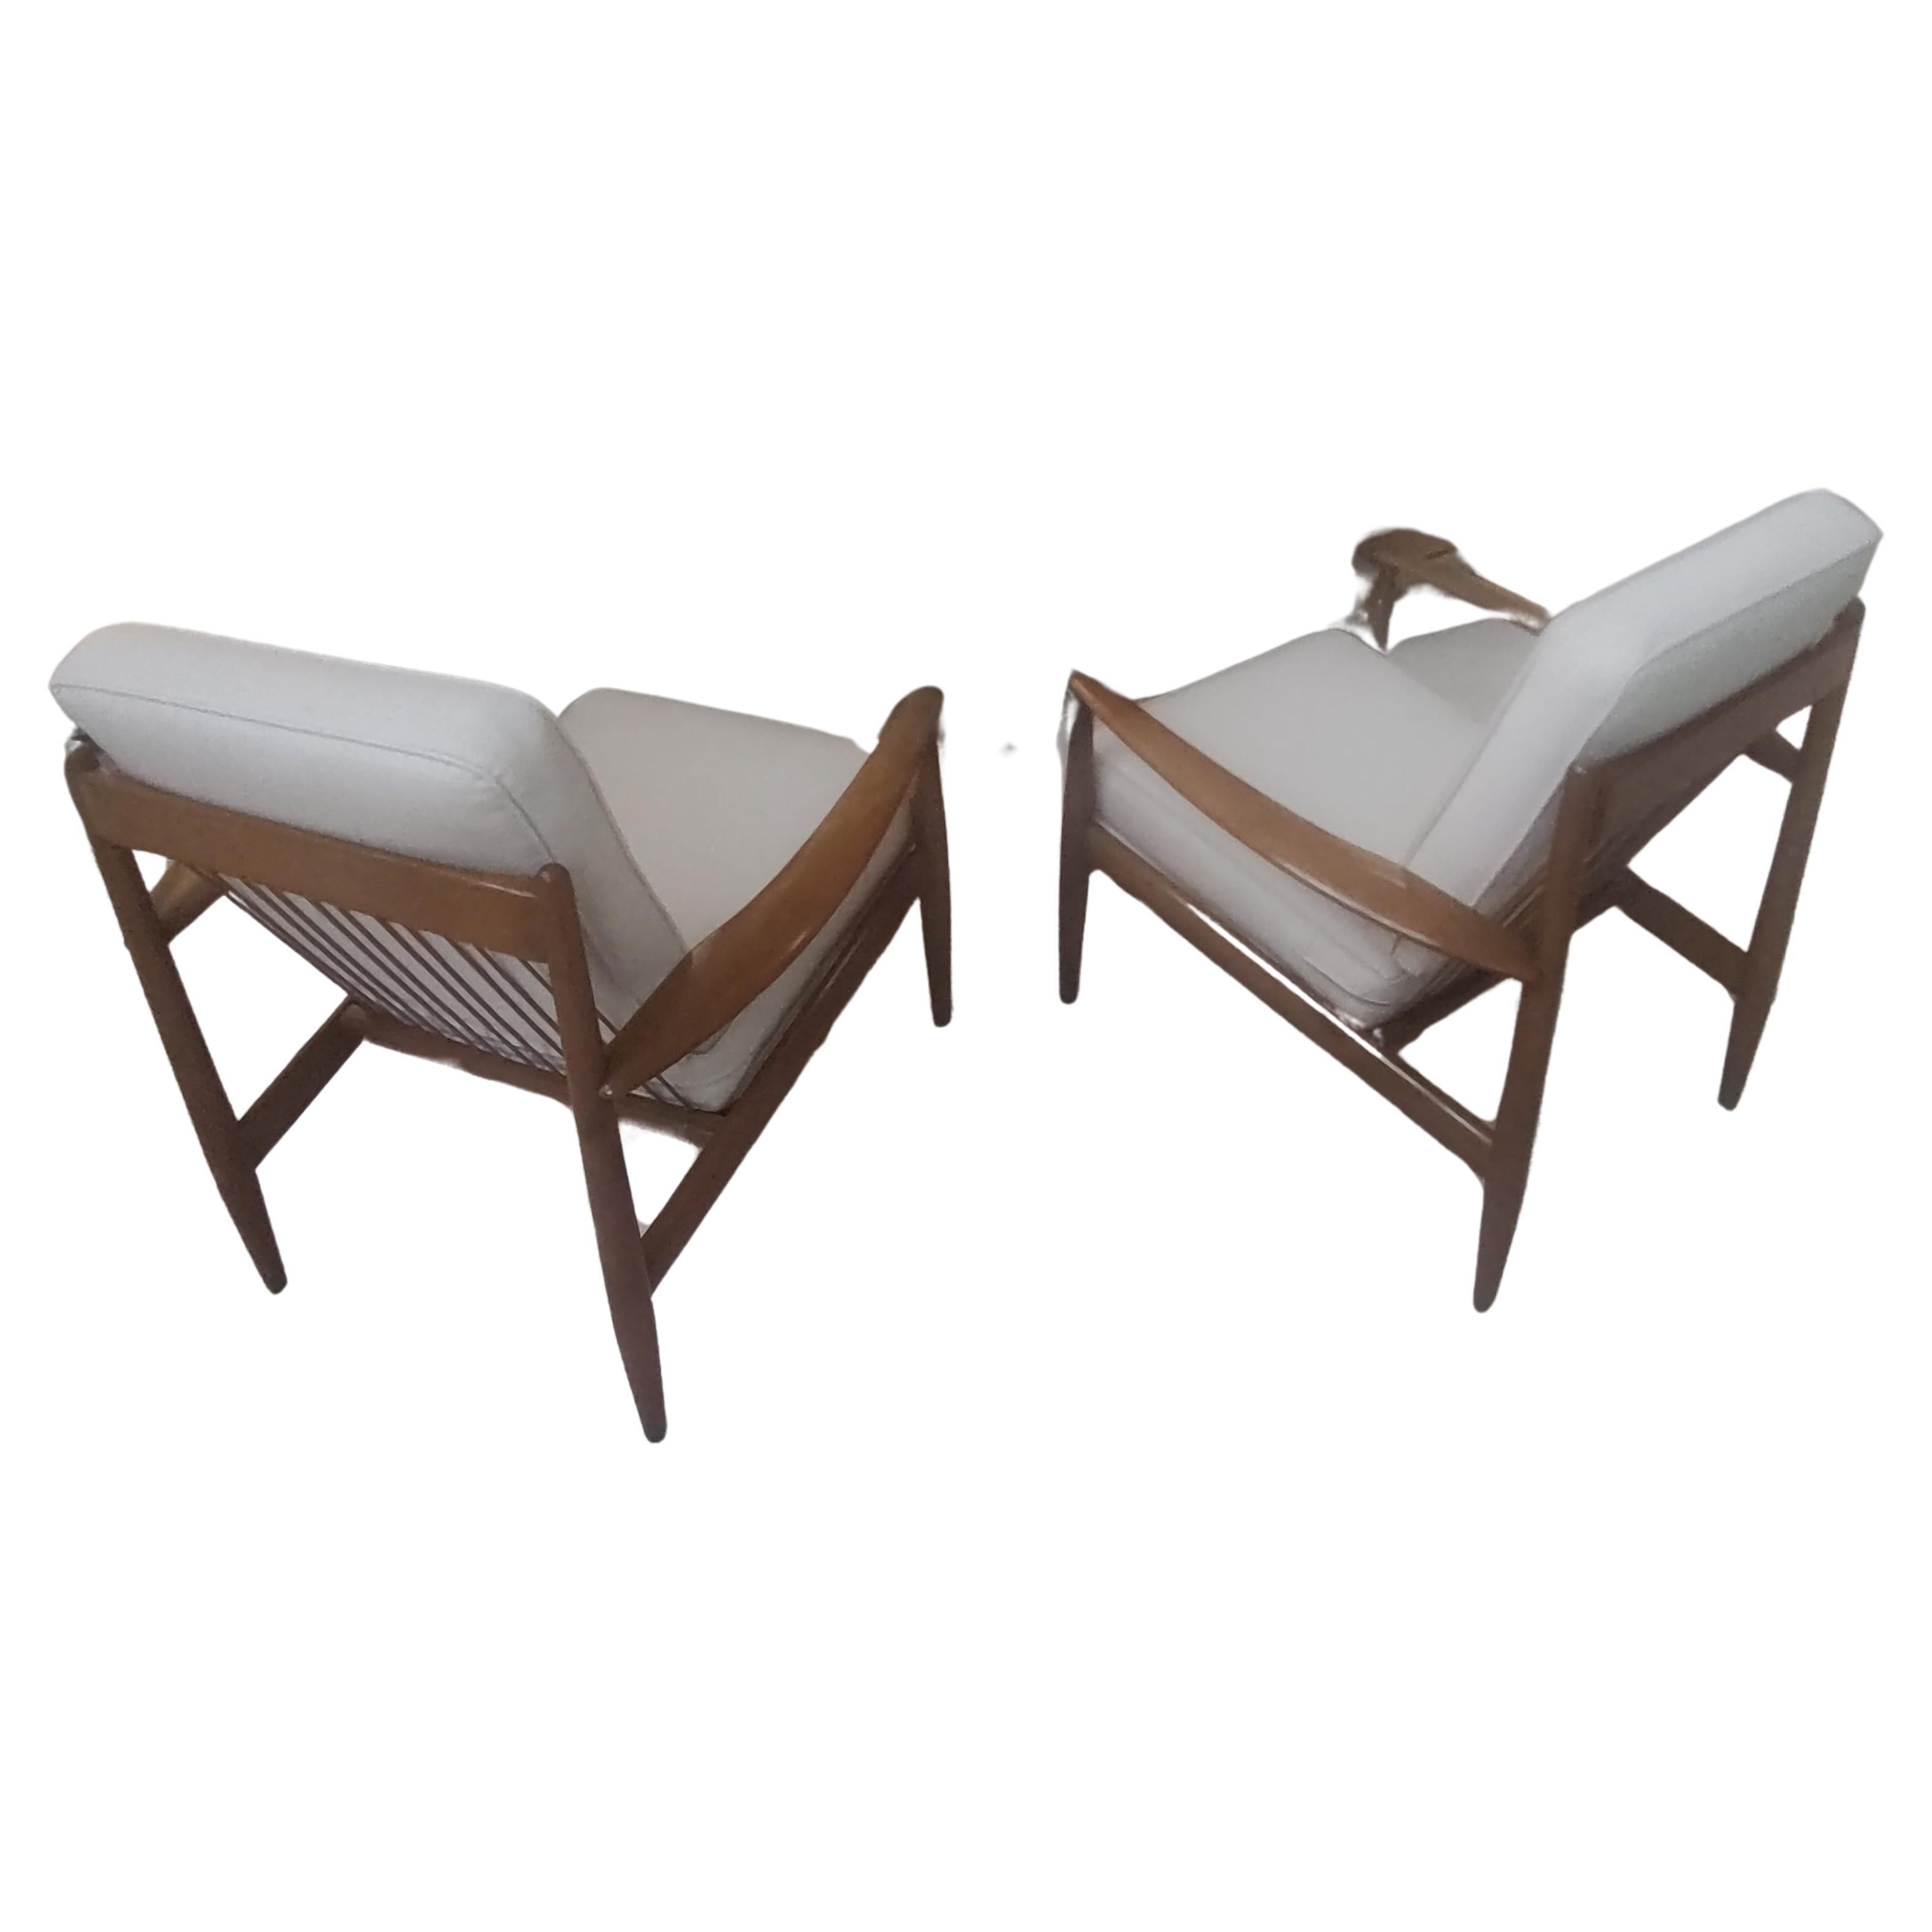 Fabulous pair of Beech Mid Century Danish Modern Lounge Chairs by Grete Jalk for John Stuart. Cushions are fairly new and in excellent condition with very little wear. Wood frames were well taken care of and in near mint condition, very little wear